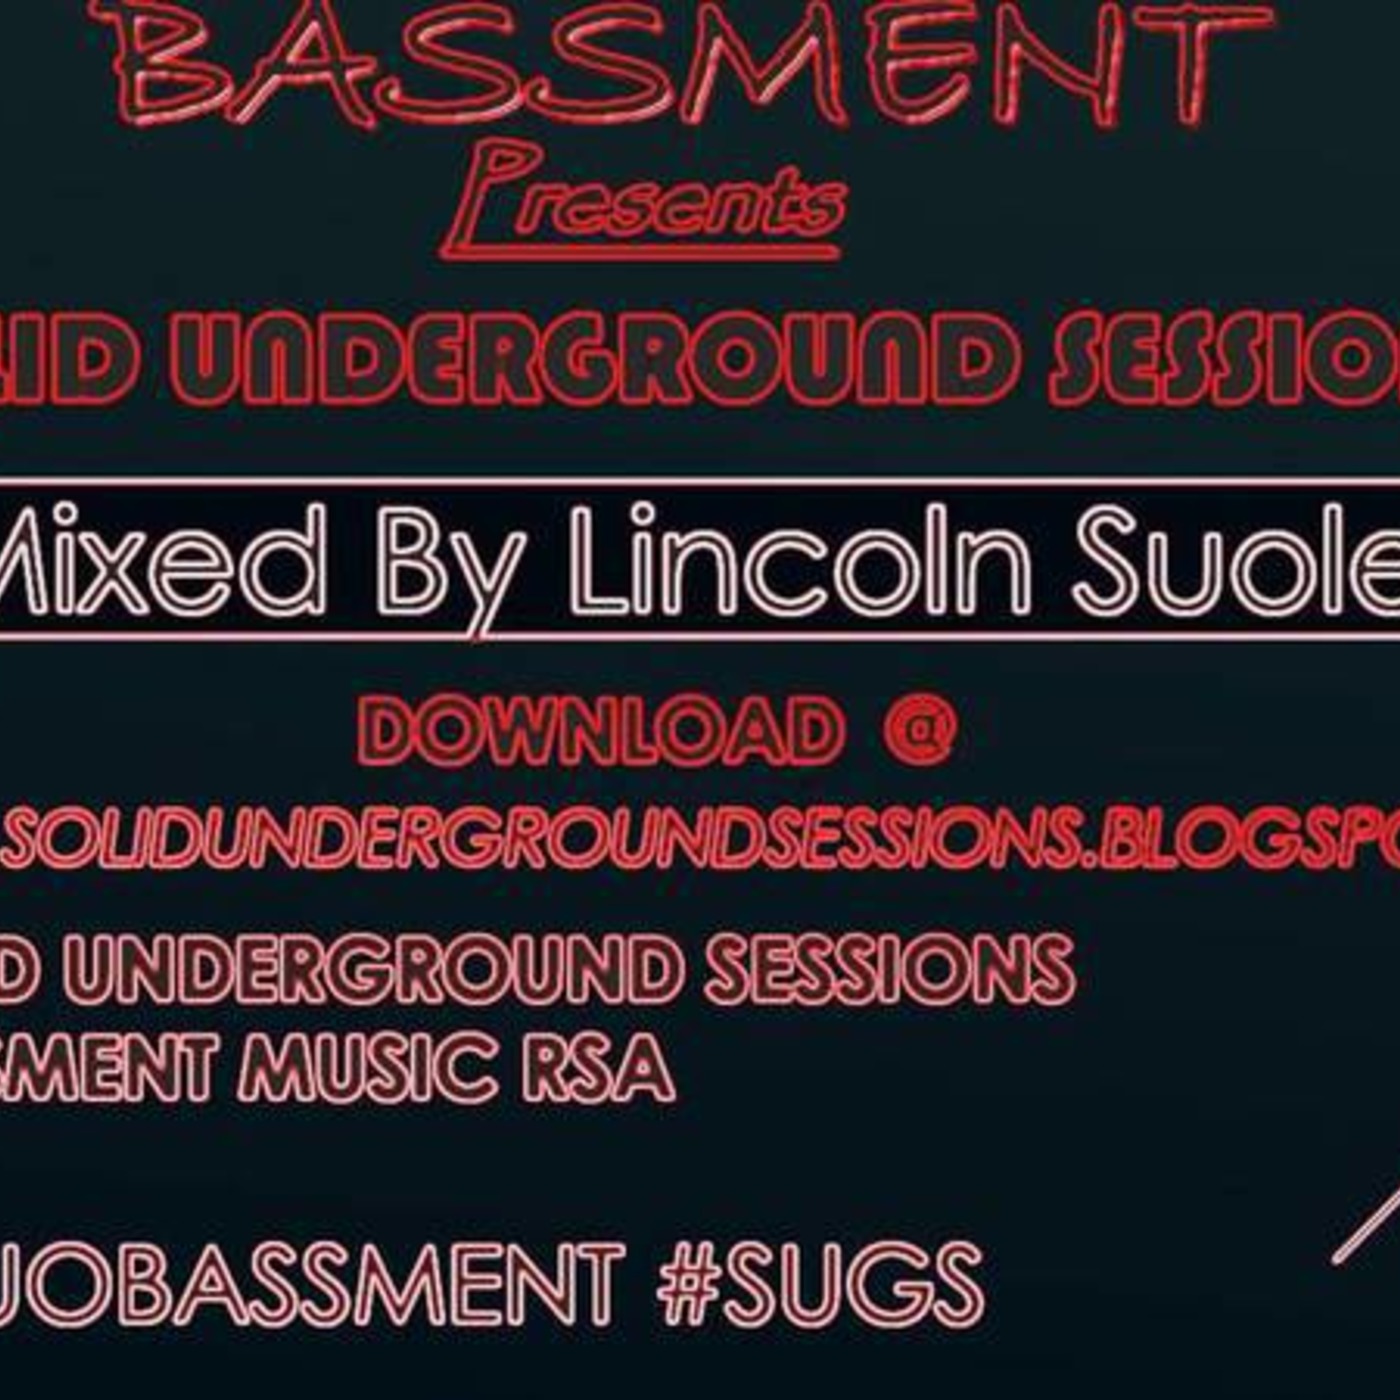 #1 Mixed By Lincoln Suole.#SUGS